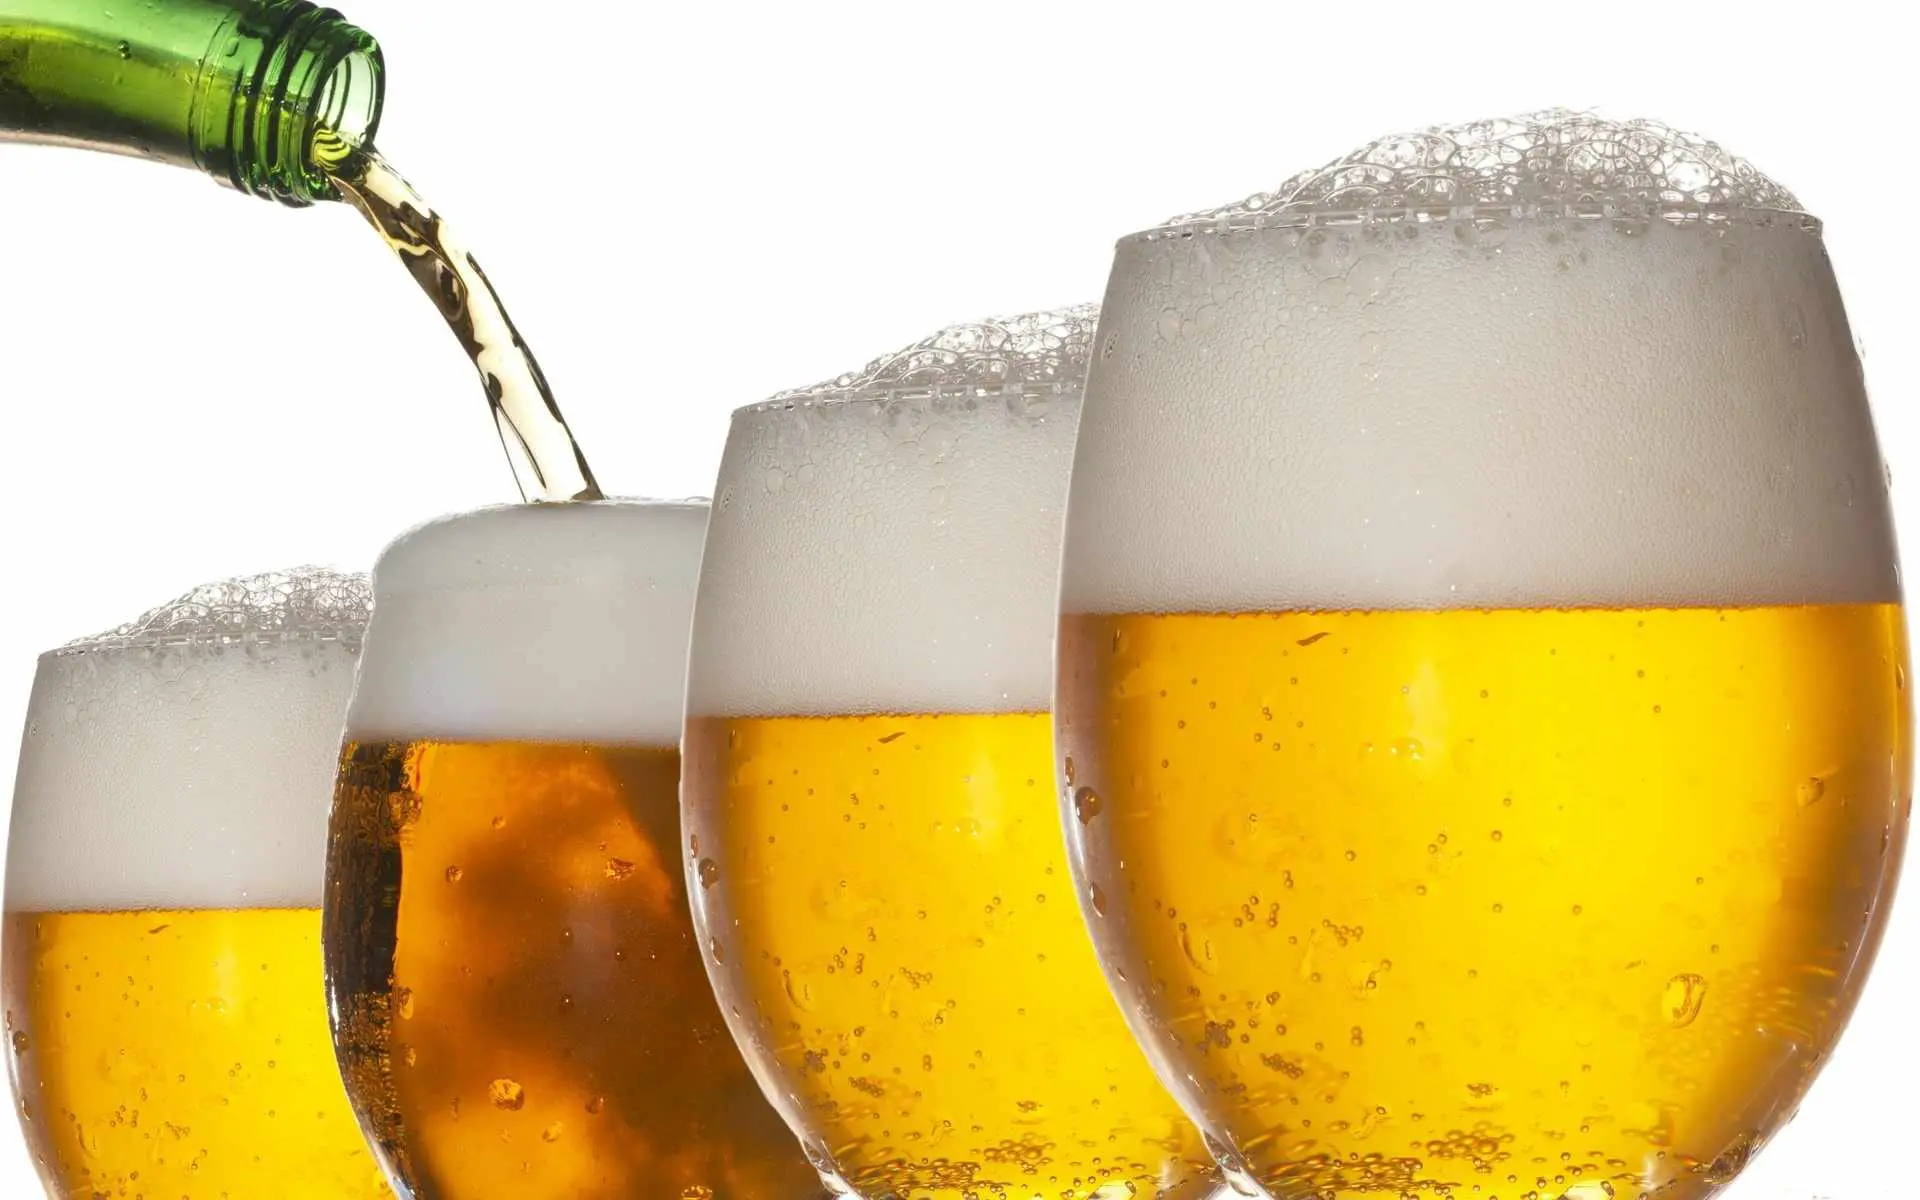 Top 5 Beer Producing Countries